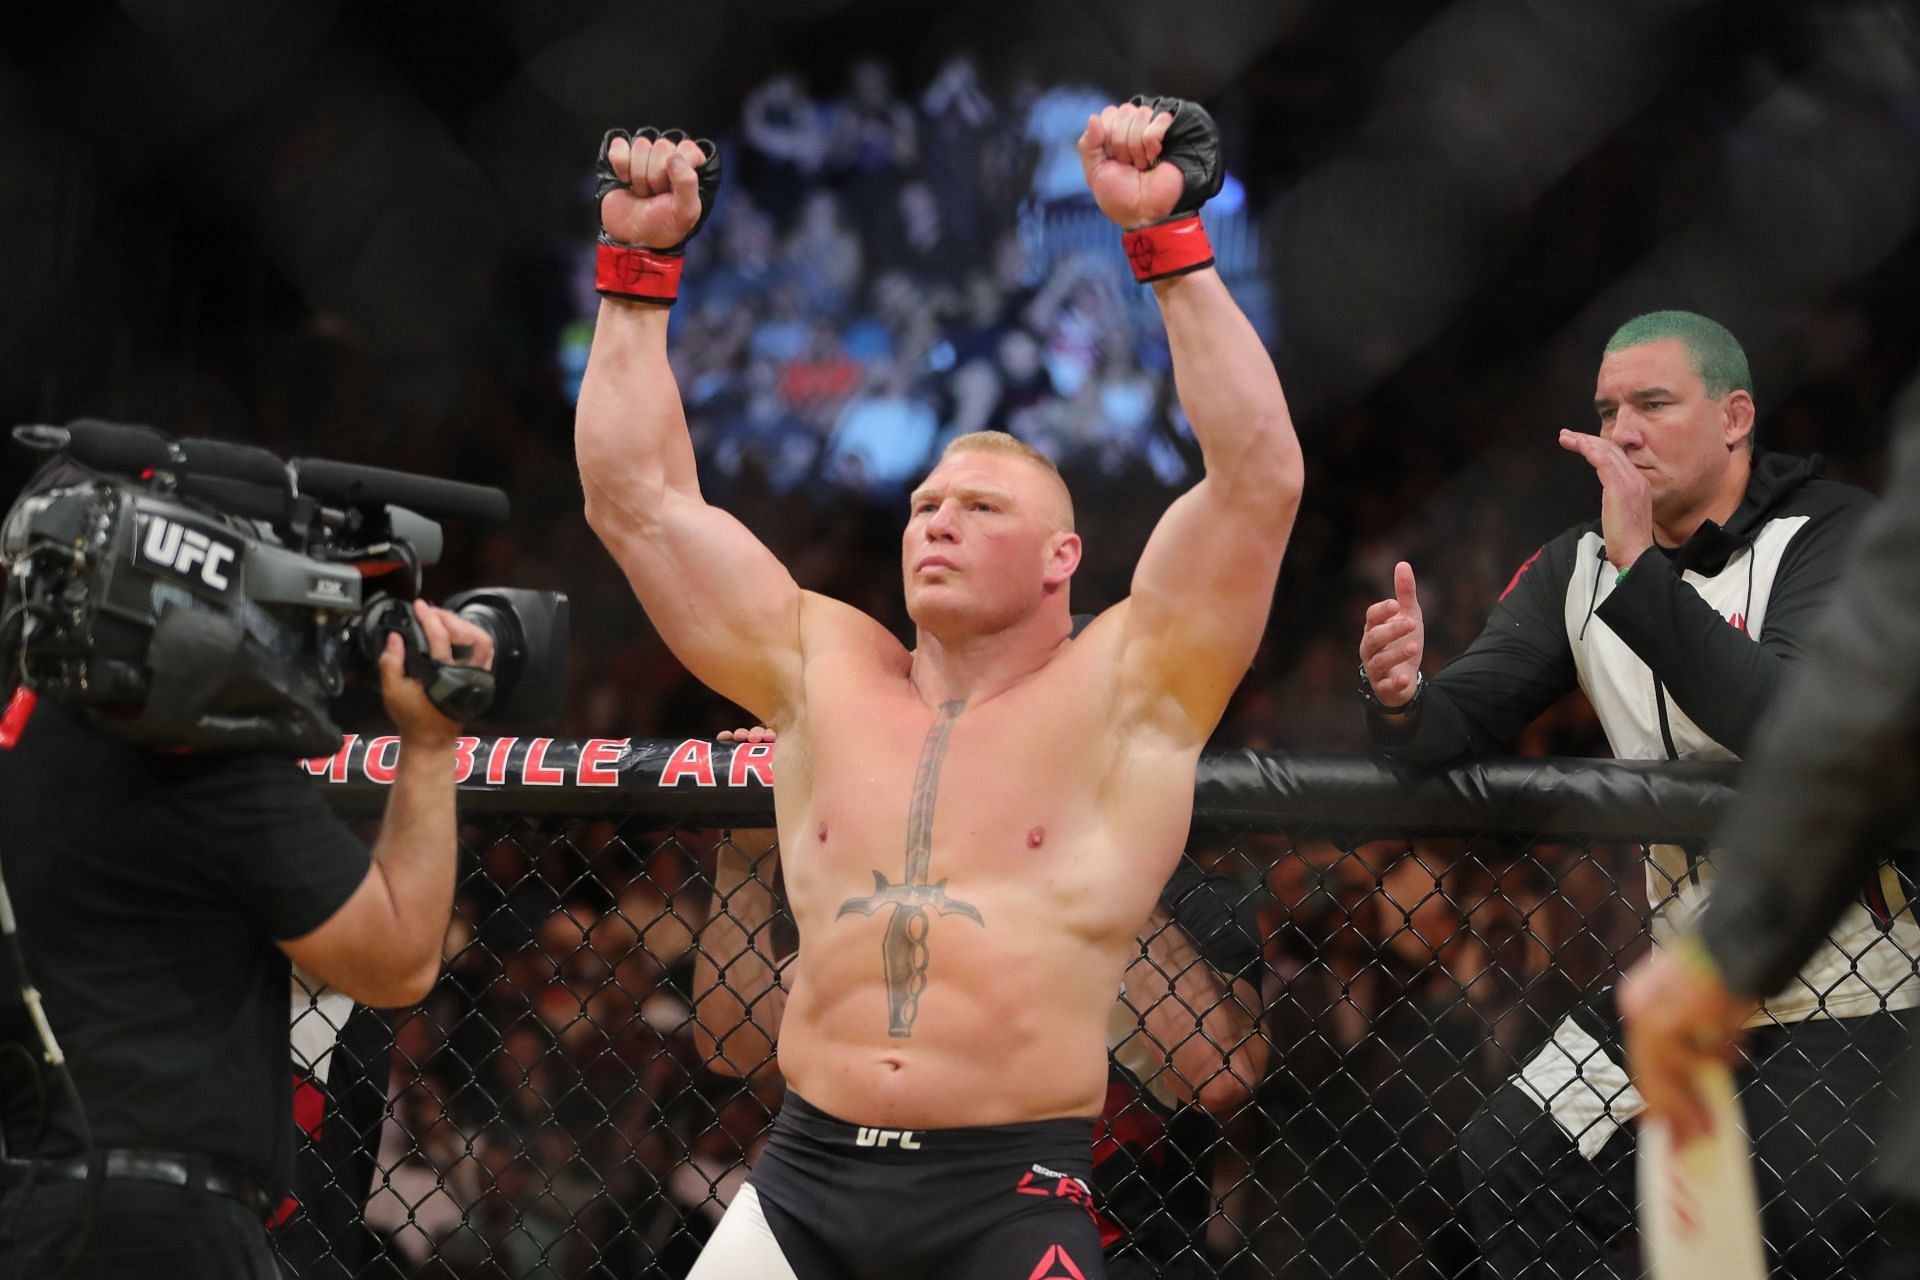 Brock Lesnar dominated in both the UFC and in WWE